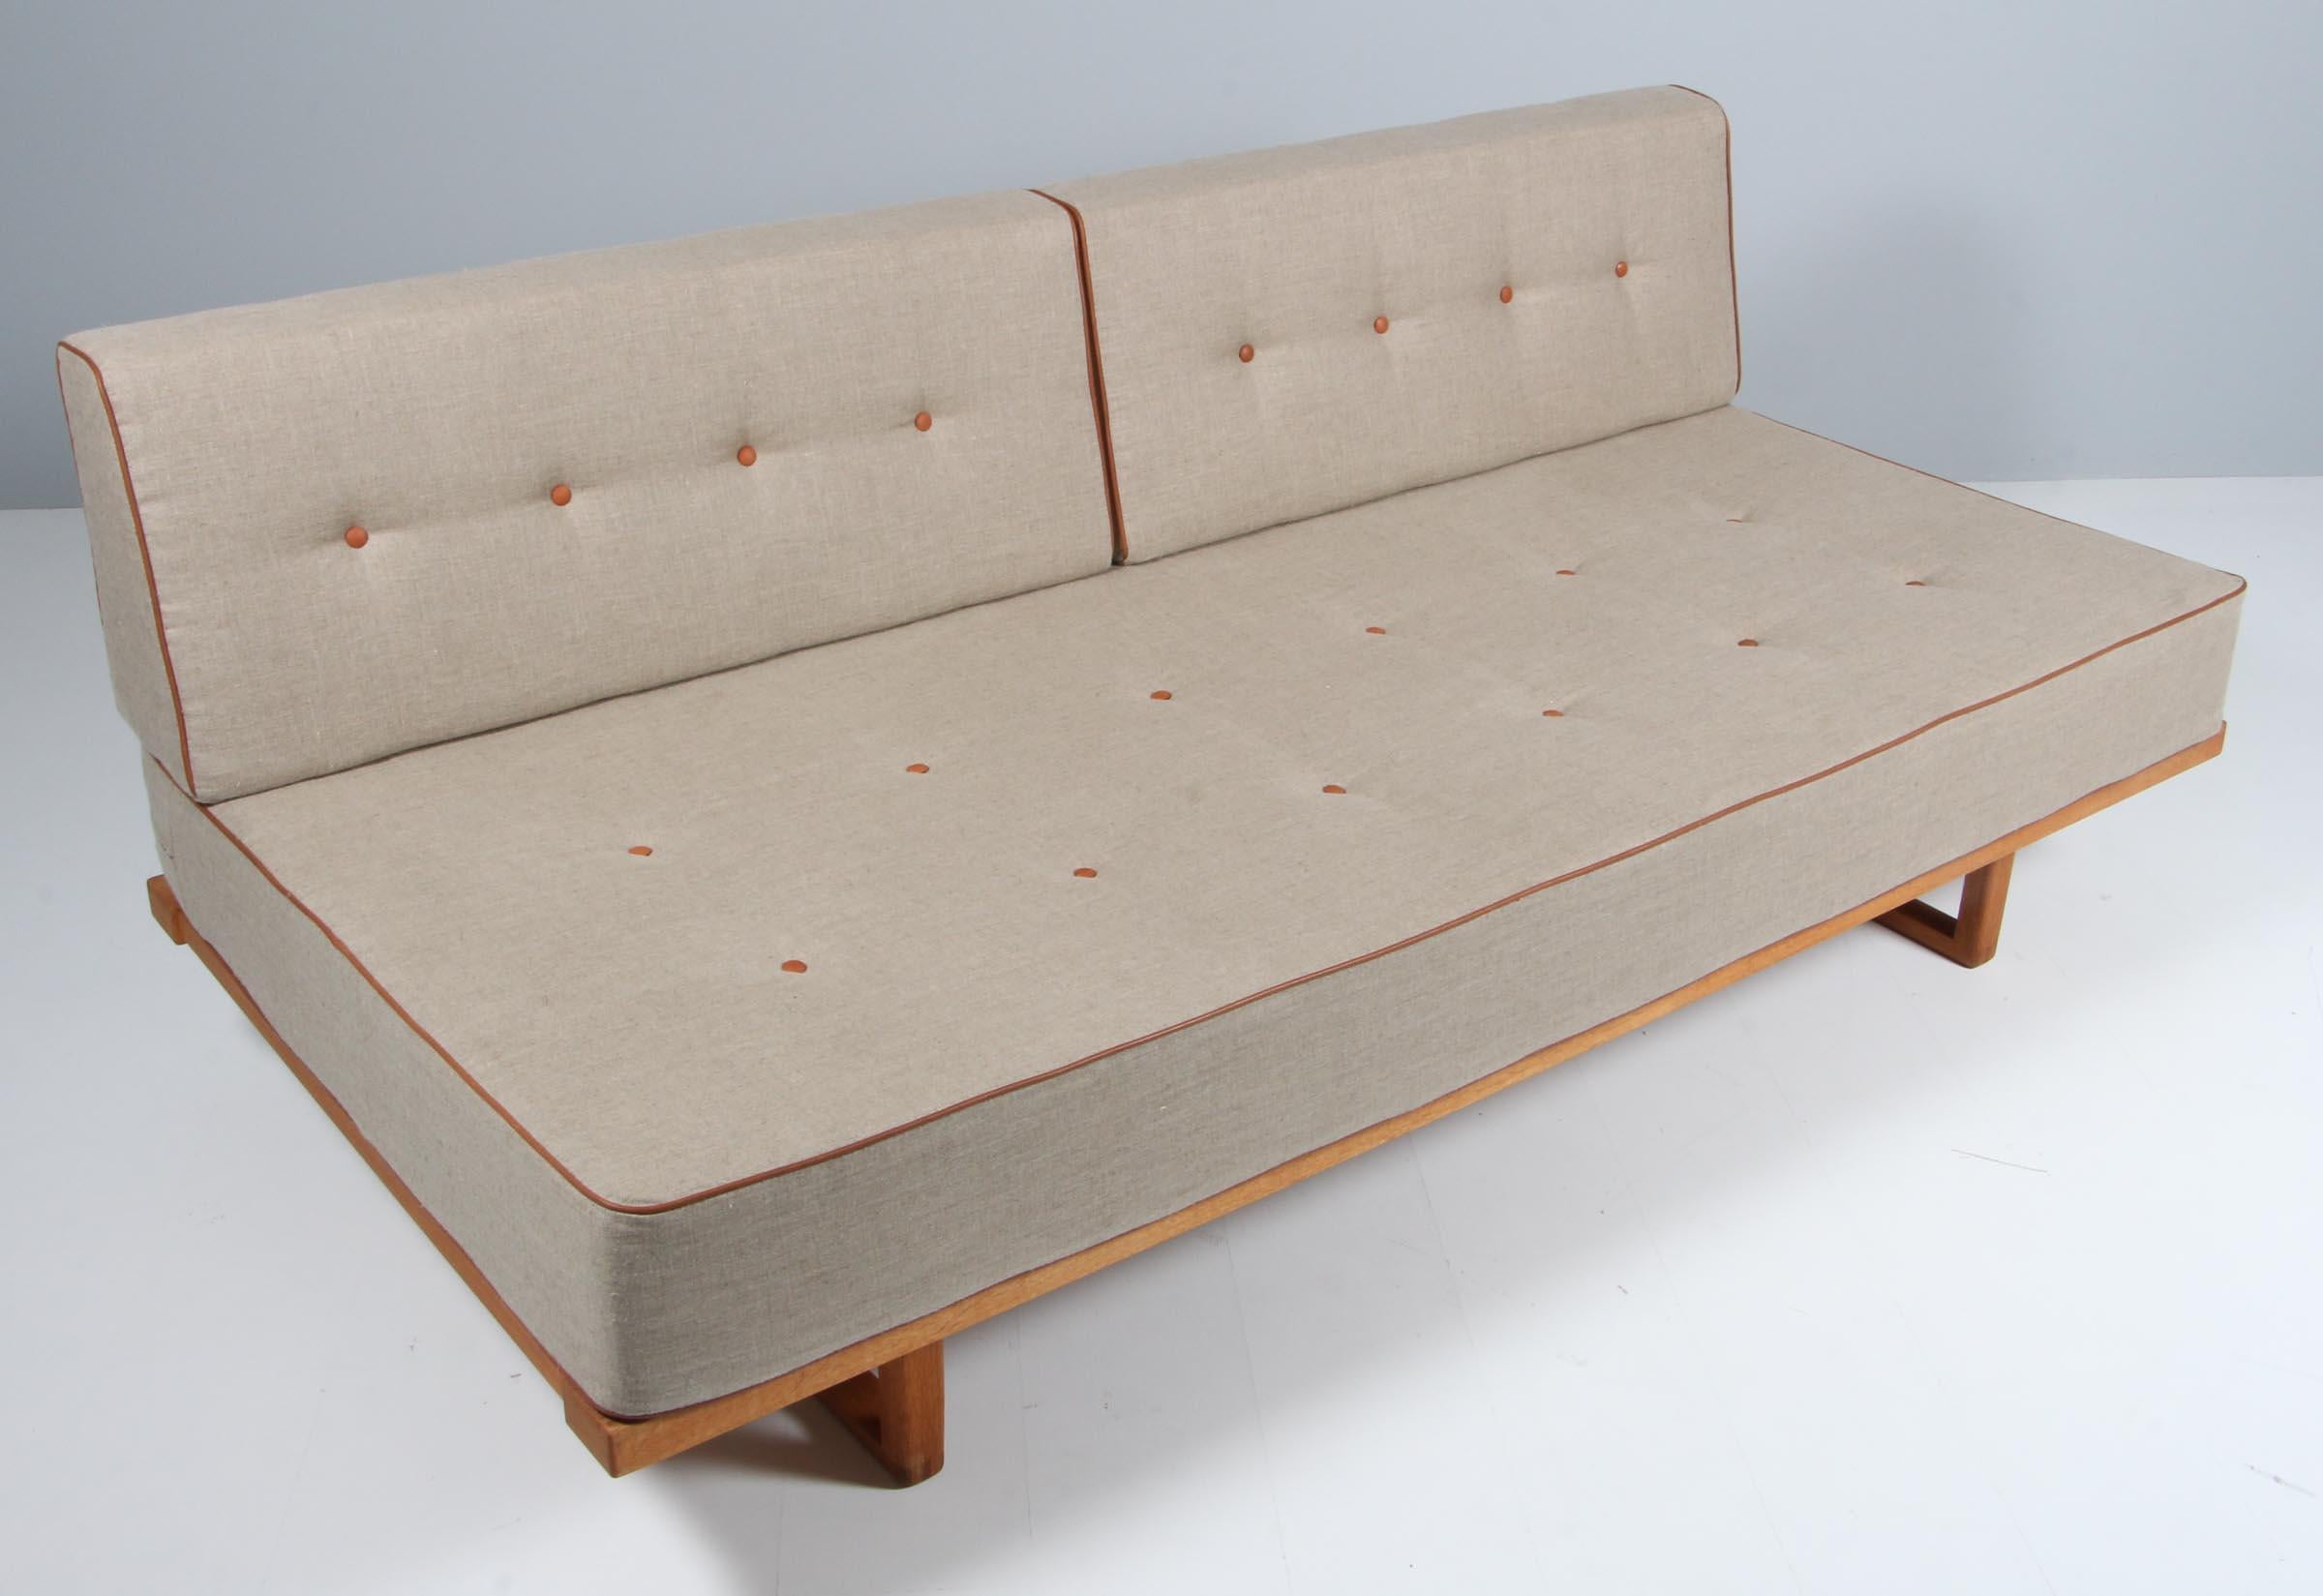 Børge Mogensen daybed / sofa with frame of oil treated oak.

New upholstered with canvas leather, leather piping and buttons.

Model 4316, made by Fredericia.